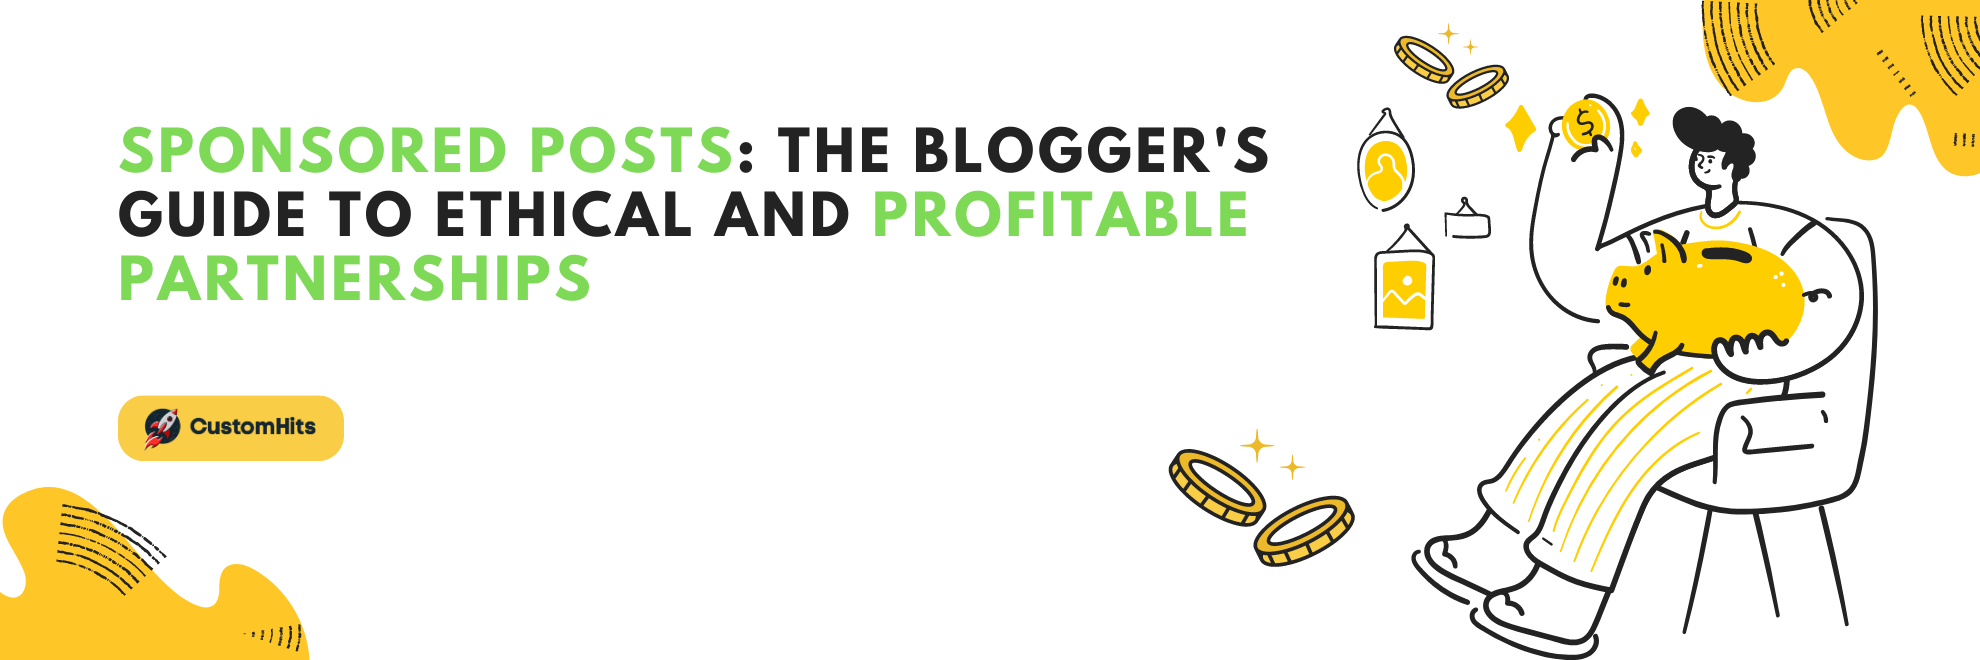 Sponsored Posts: The Blogger's Guide to Ethical and Profitable Partnerships